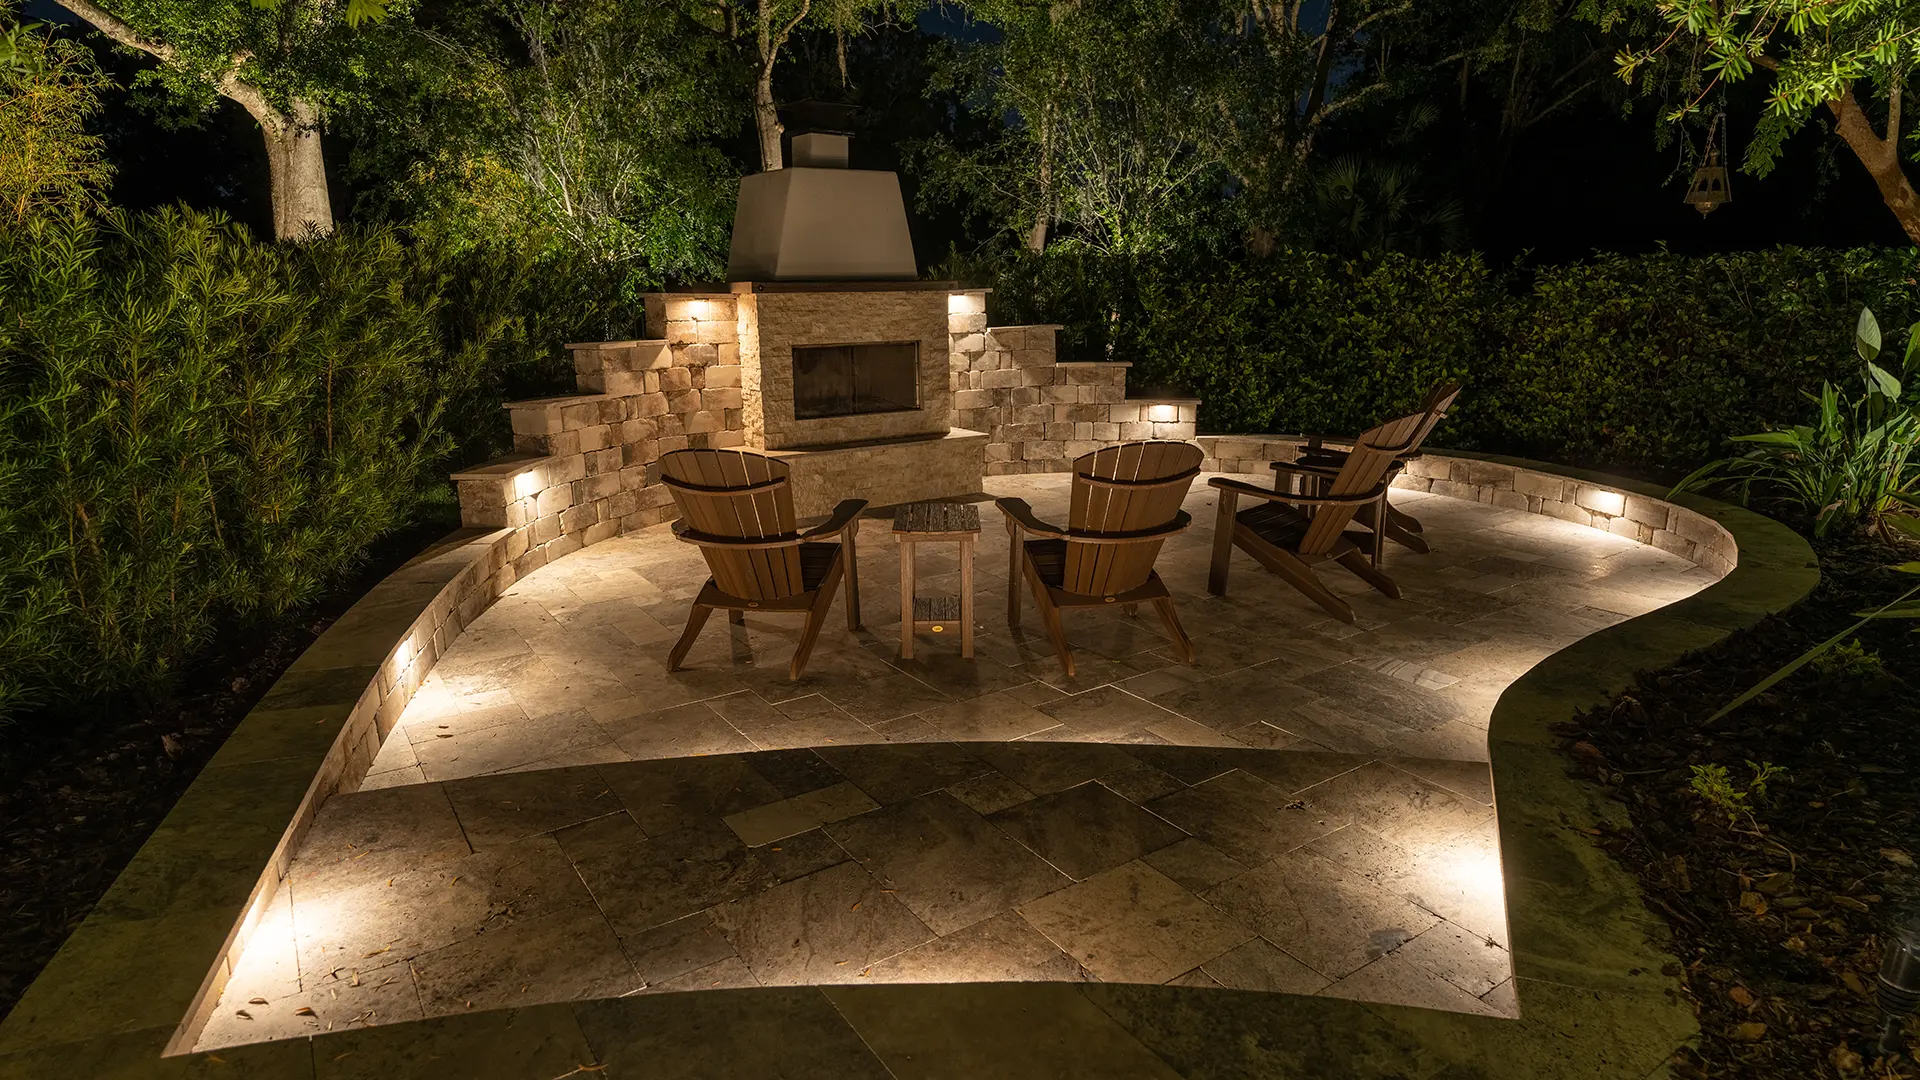 3 Great Ideas of How to Use Landscape Lighting to Improve Your Parties